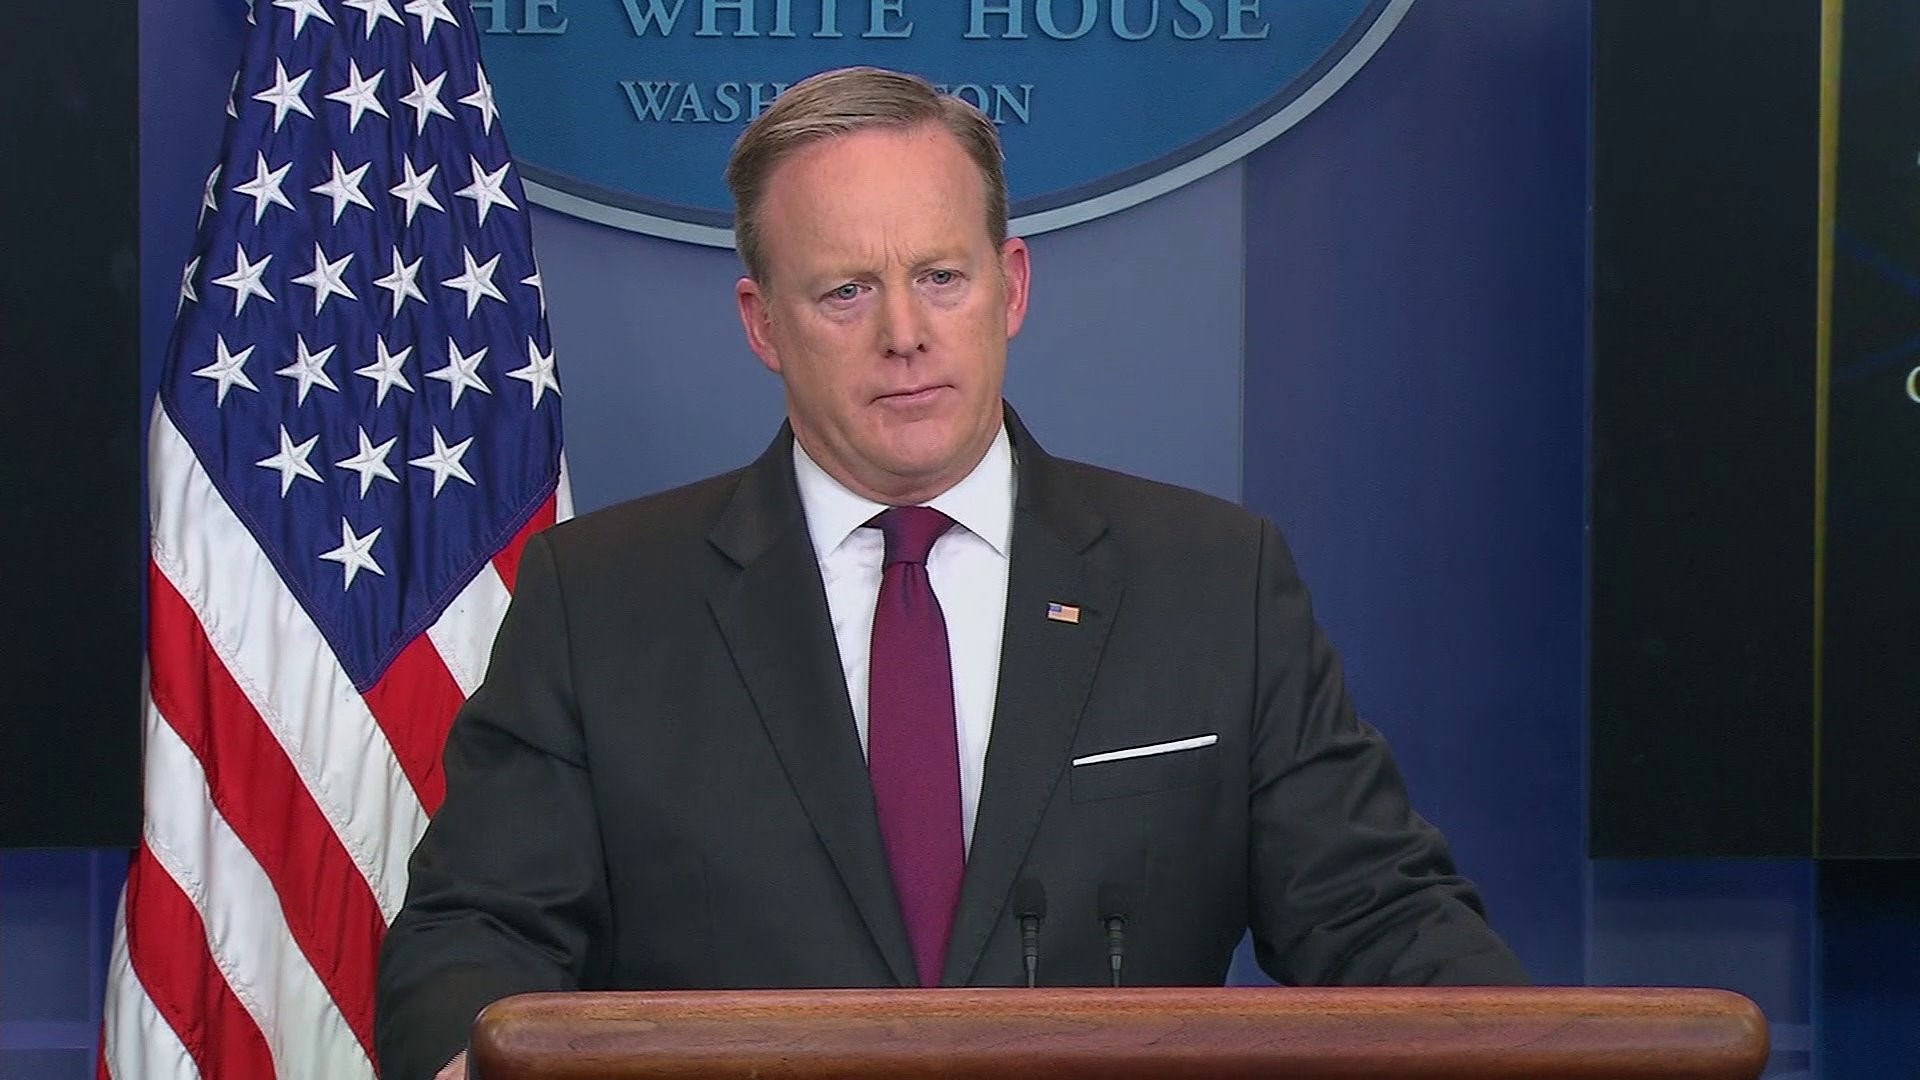 WH Press Briefing: Secretary Spicer calls out Gov. Malloy